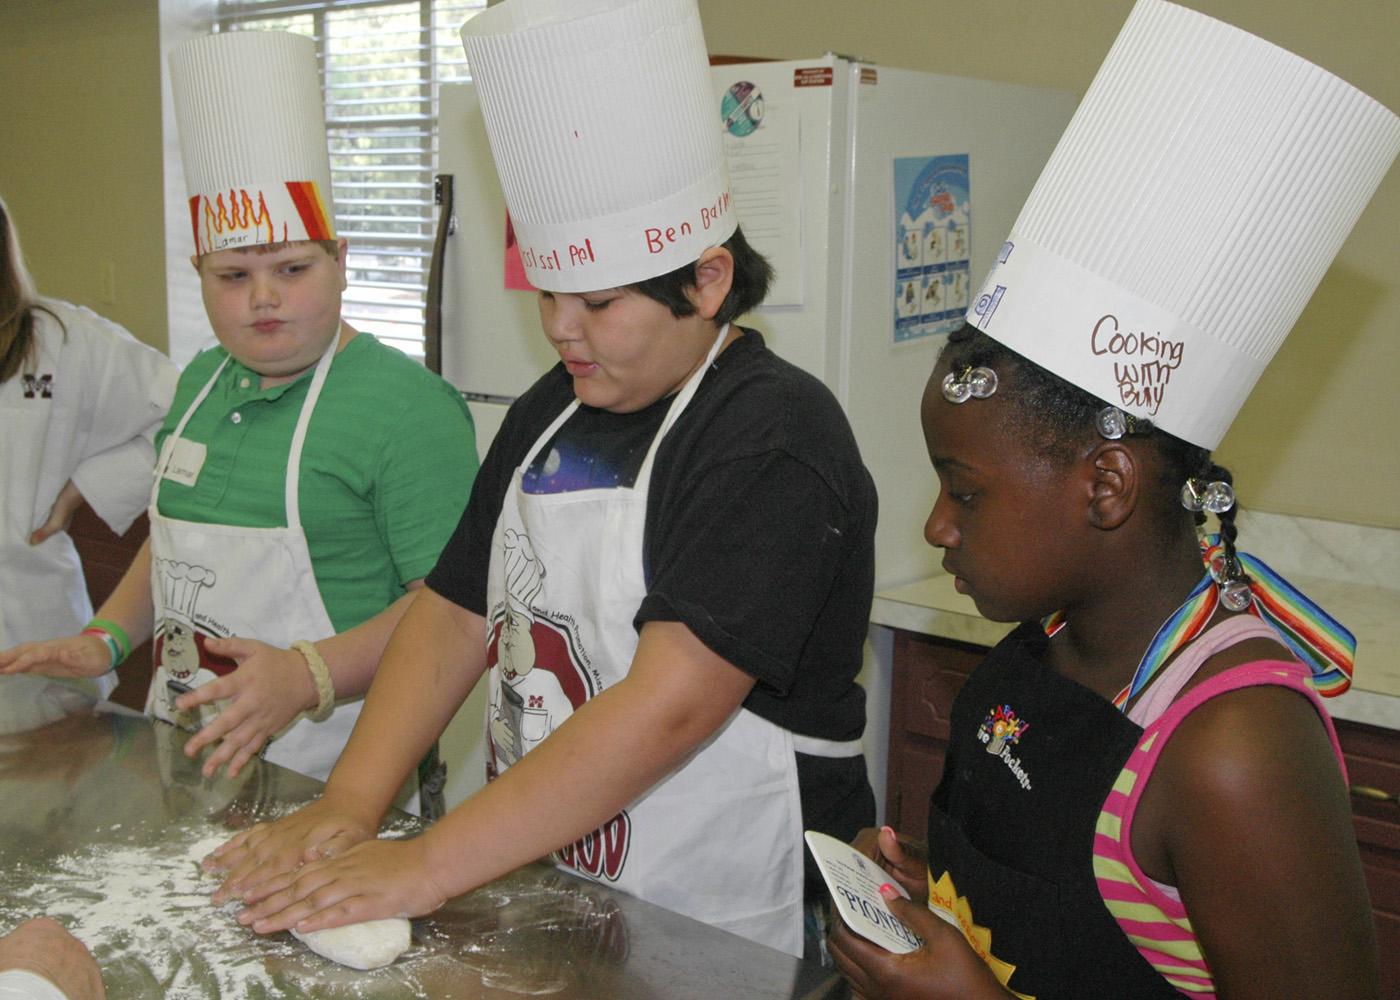 From left, Lamar Land, Ben Barker and Murritta Lane work as a team kneading dough to make bread. "Fun with Food" participants made many nutritious meals during their week at camp. (Photo by MSU Office of Ag Communications)